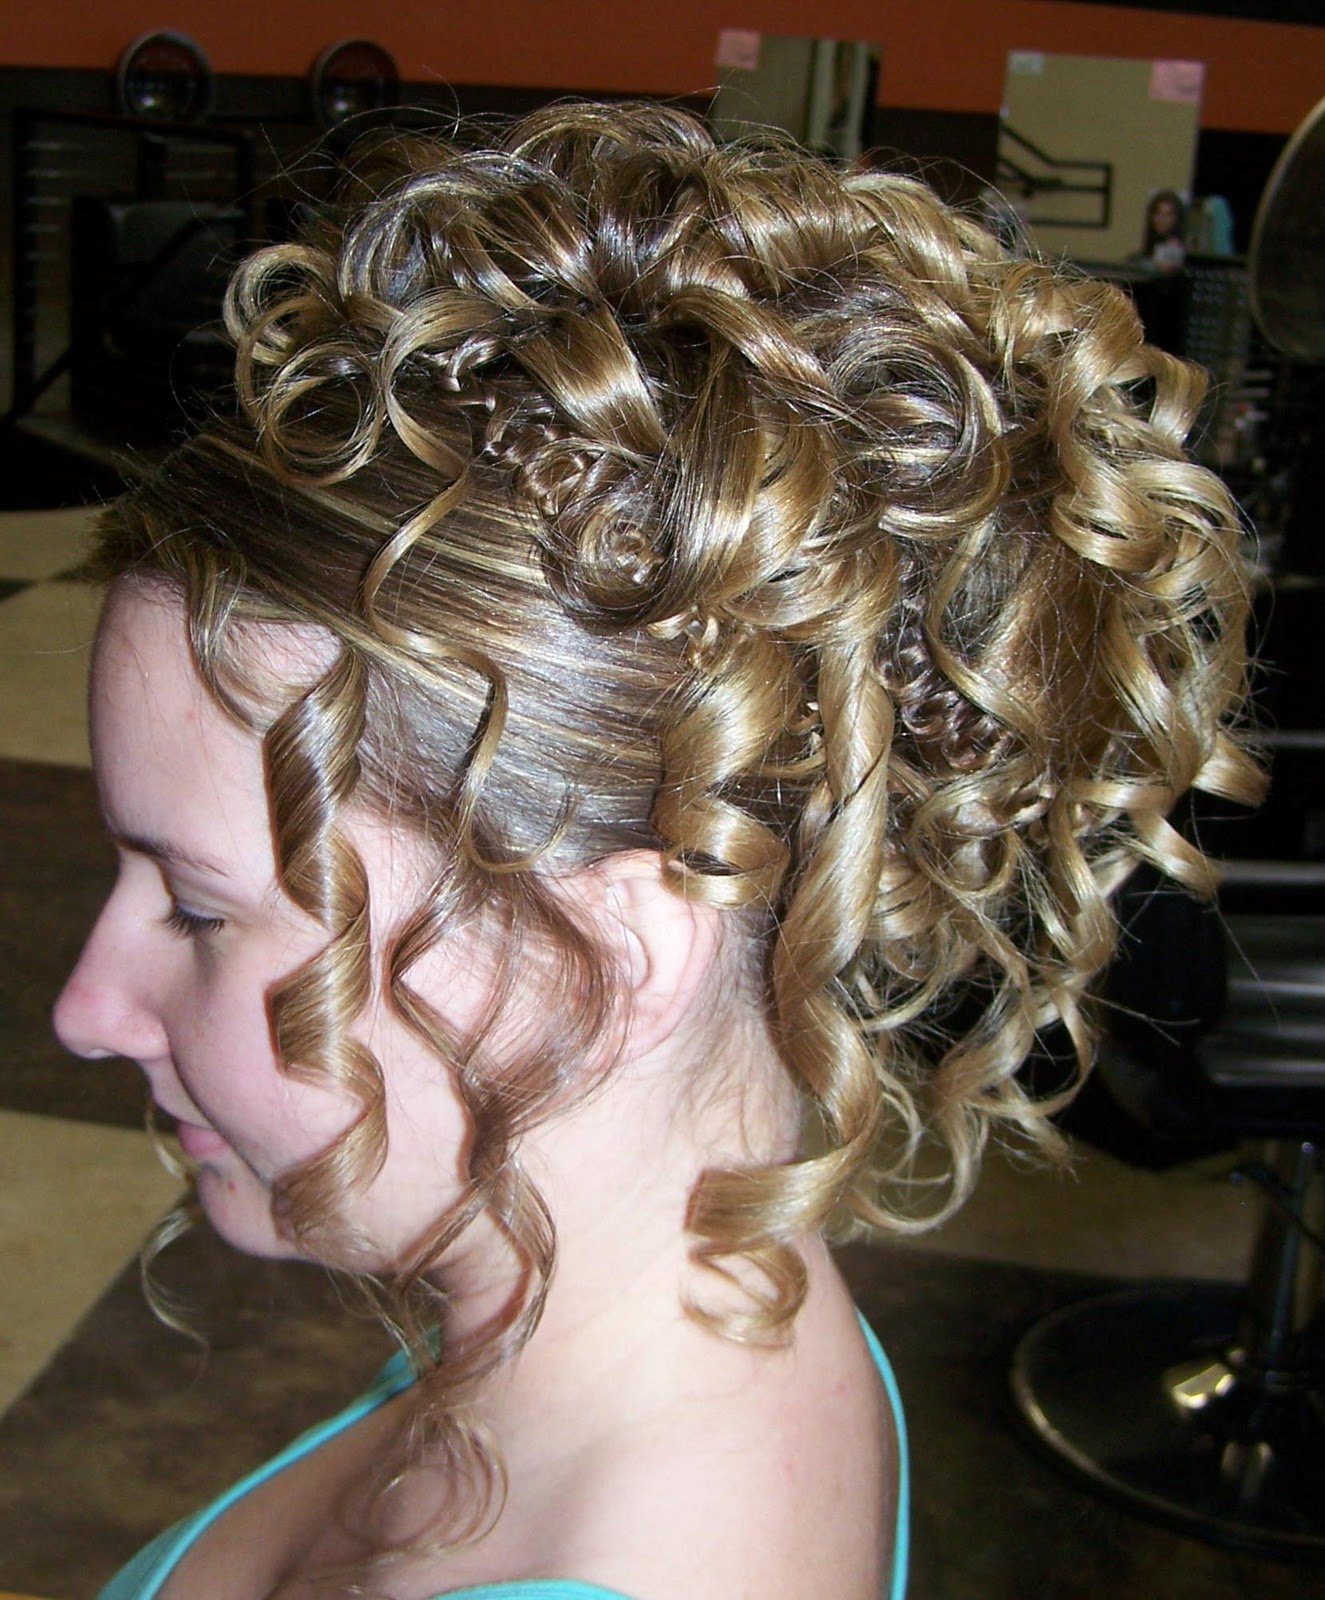 Fun and Crazy Curly Updo with